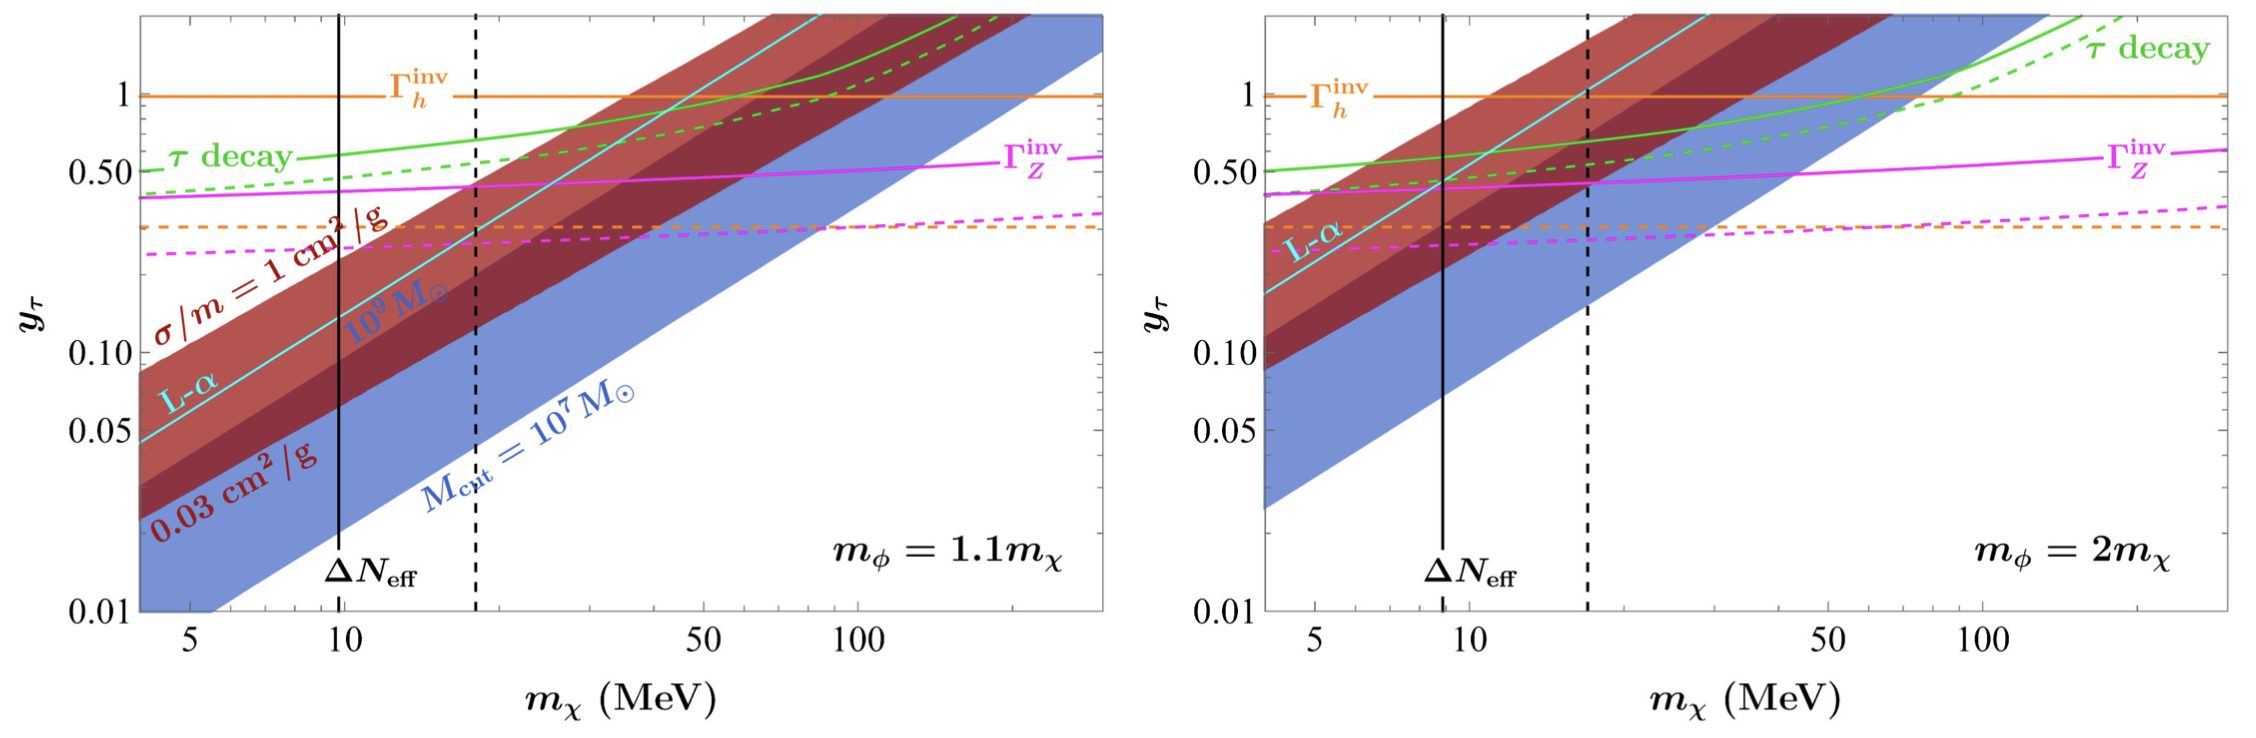 Two panels show two scenarios for the cross section from DM self-interaction via neutrinos. The dependent variable is the Yukawa coupling for the tau neutrino, and the independent variable is the mass of the DM candidate. The left panel is for the mass of the scalar field being 1.1 times the mass of the dark matter candidate, and shows a diagonal red band and blue band overlapping and creating a band of dark red representing a unified solution for small scale structure puzzles. The solid lines indicate current bounds, and imply a possible parameter space for DM candidate mass in the left plot is between about 10 and 50 MeV. The dashed lines indicating projected bounds frame a small portion of the dark red band in the centre of the left plot, implying that the projected possible parameter space for DM candidate mass in this model is between 20 and 40 MeV. The right panel shows the same elements for the scenario of the mass of the scalar field being 2 times the mass of the DM candidate. In this scenario, there is no dark red band, or unified solution, within the projected bounds, but within the current bounds the possible mass for the DM candidate is about 9 to 20 MeV.